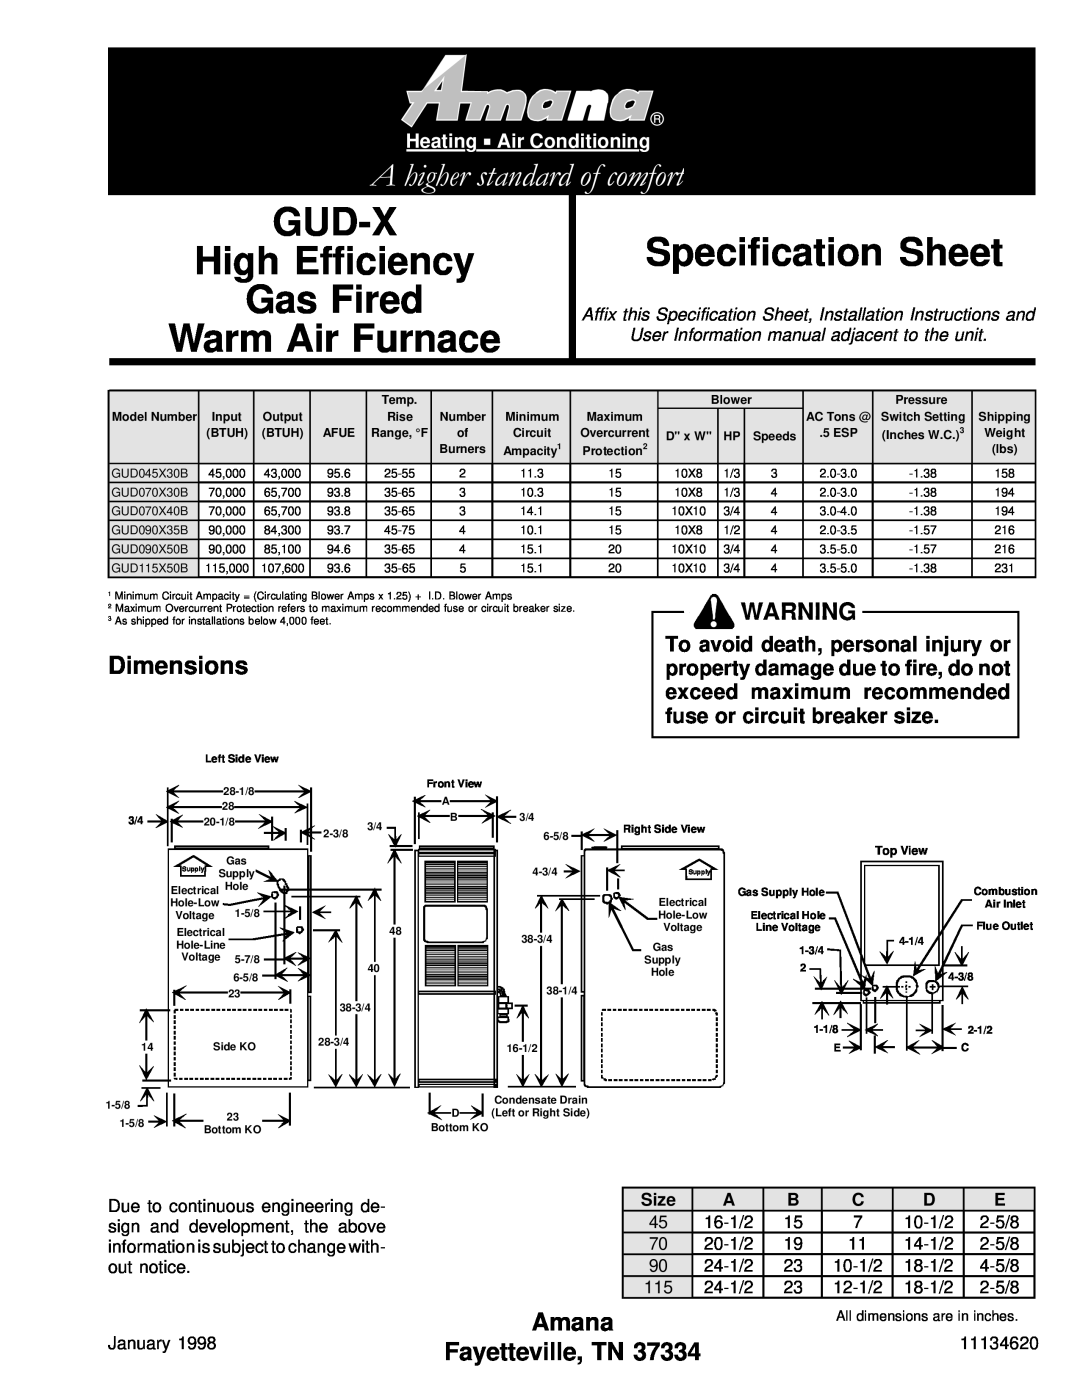 Amana GUD-X dimensions Dimensions, Size, 11134620, Gud-X, Specification Sheet, High Efficiency, Gas Fired, Amana 